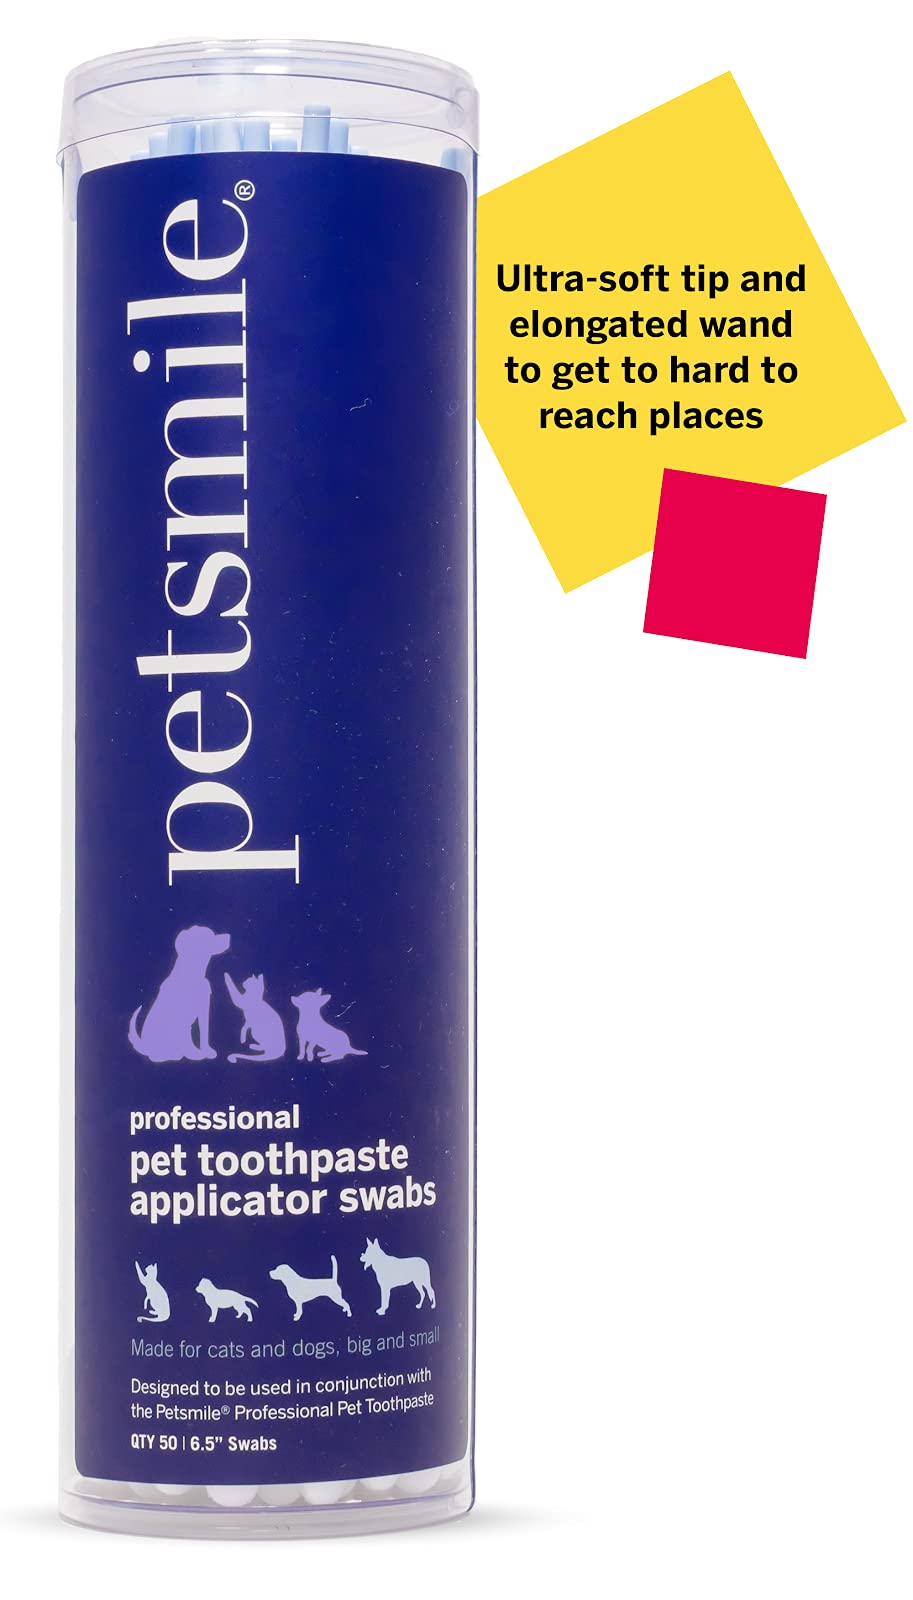 Petsmile Professional Pet Toothpaste Applicator Swabs | Easily and Effectively Spreads Dog Toothpaste to Promote Oral Hygiene | Dental Care for Pets | VOHC Approved Brand